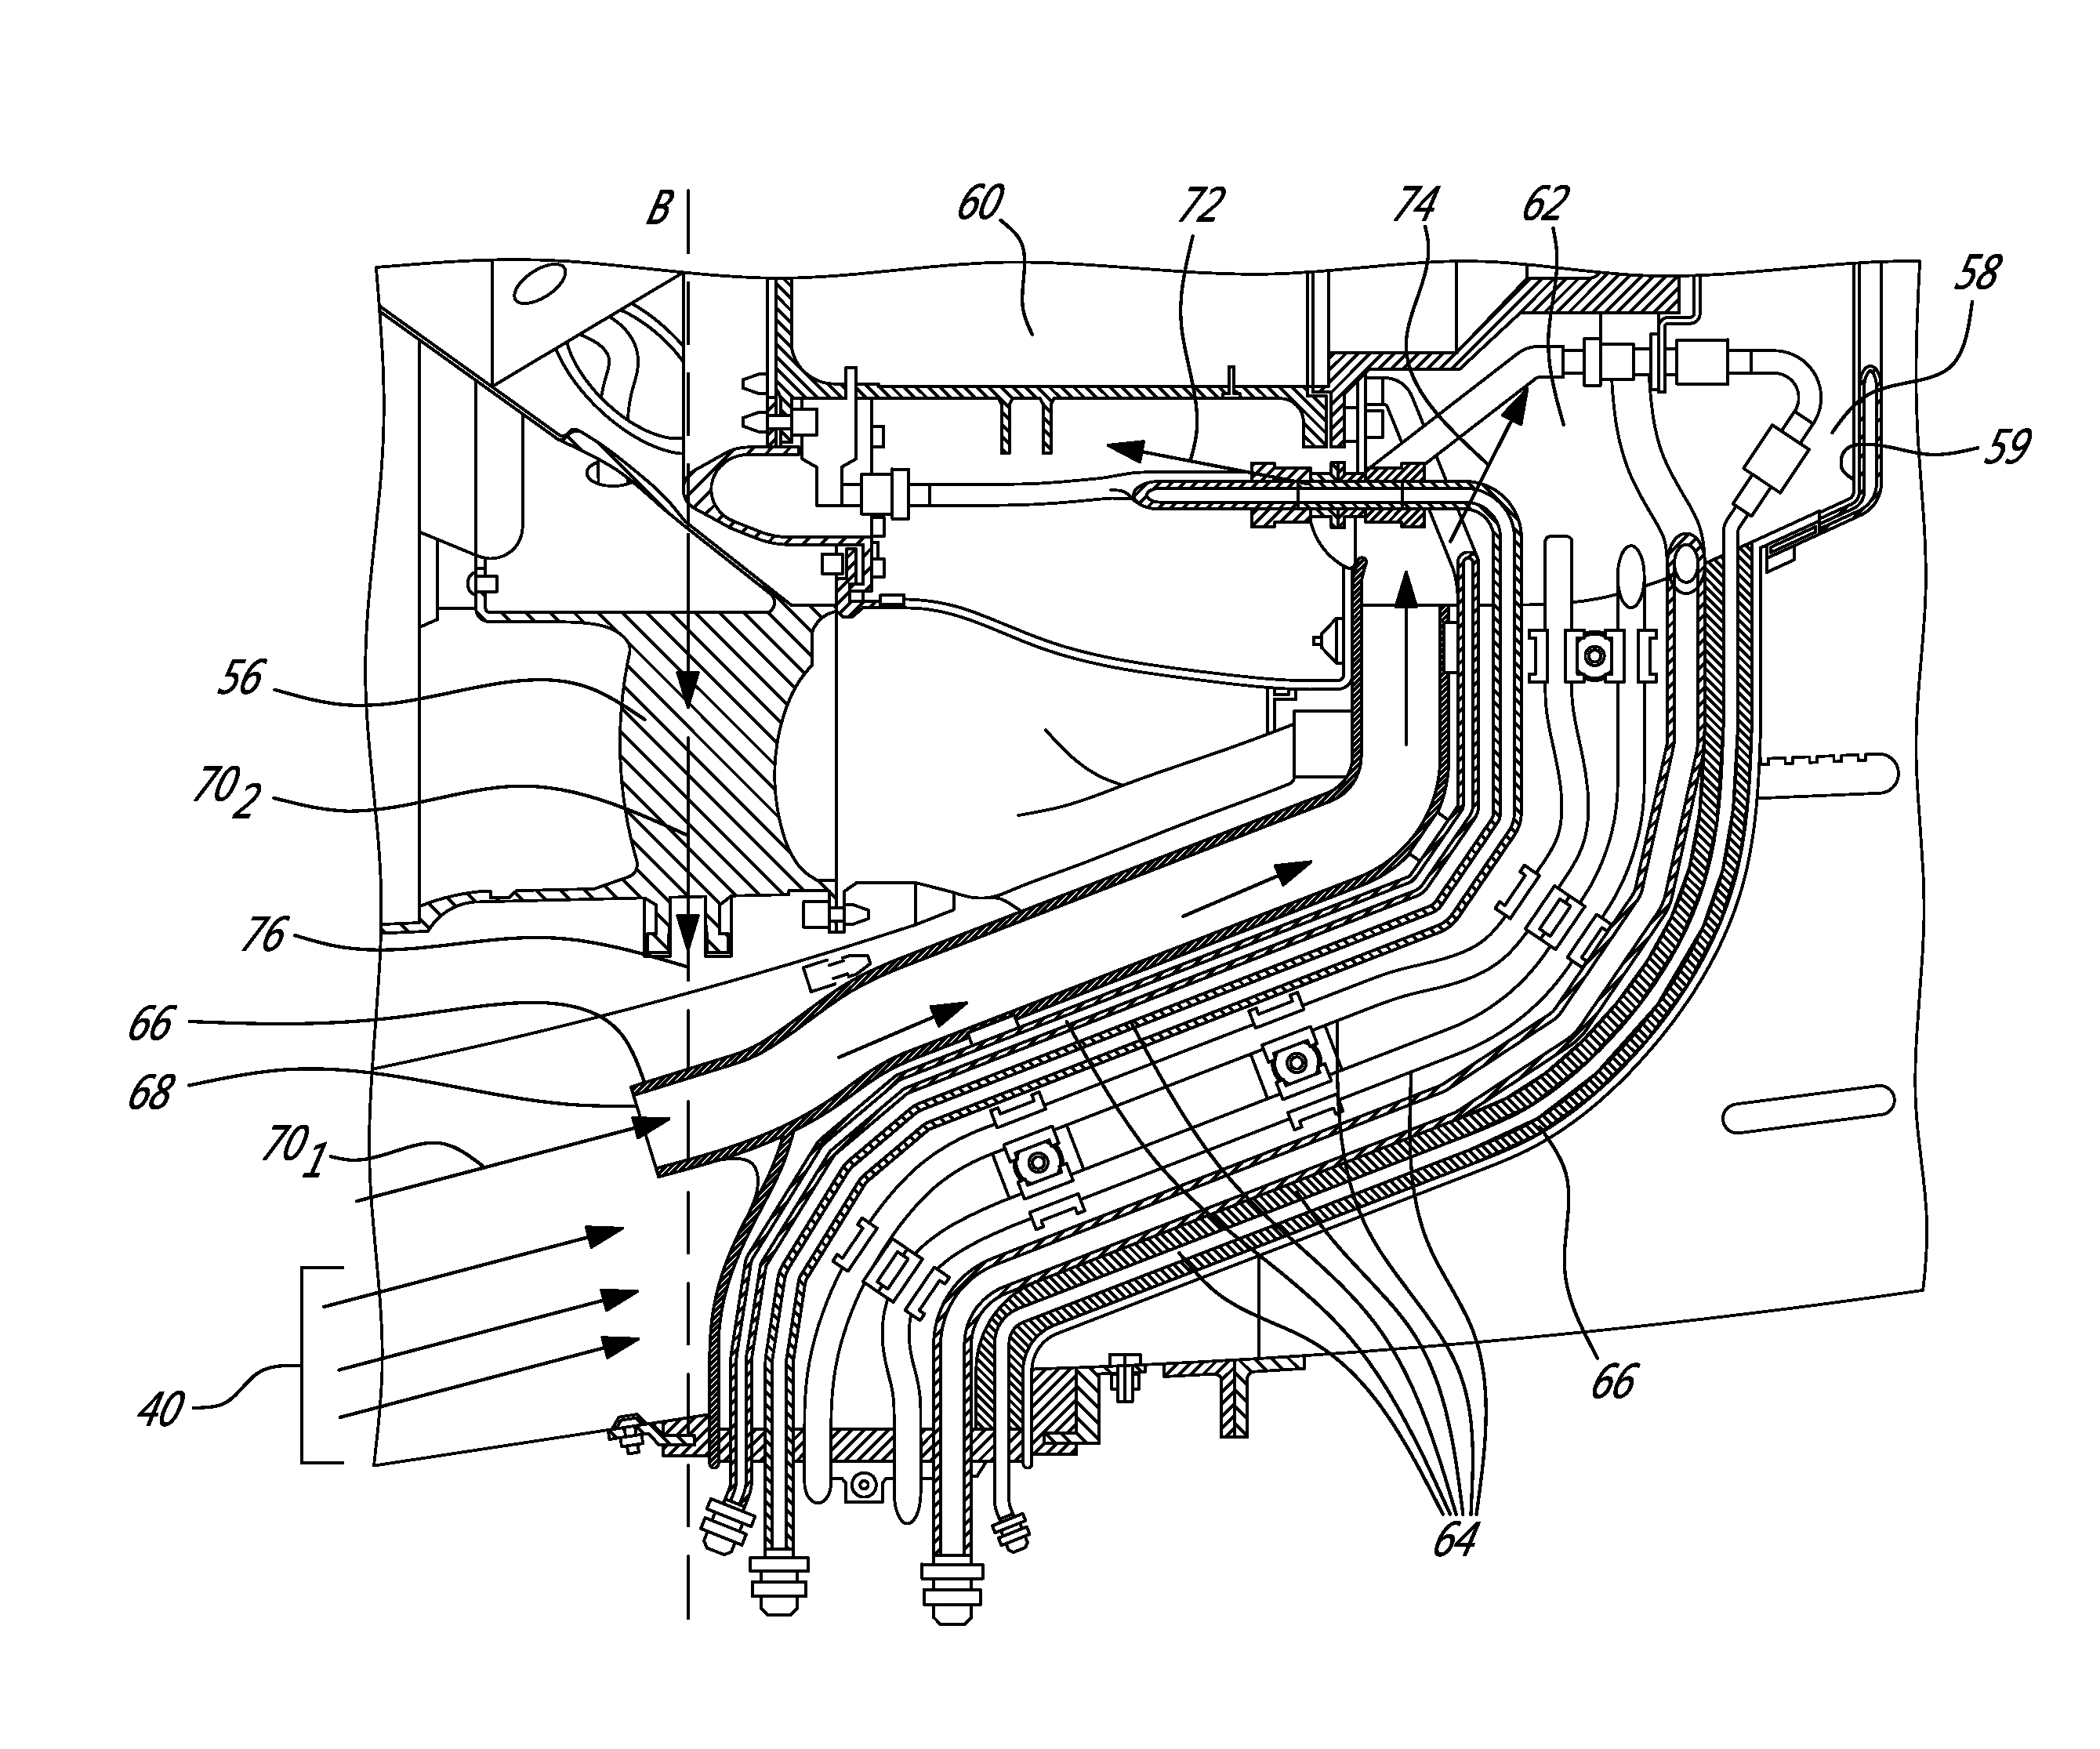 Air cooling design for tail-cone generator installation